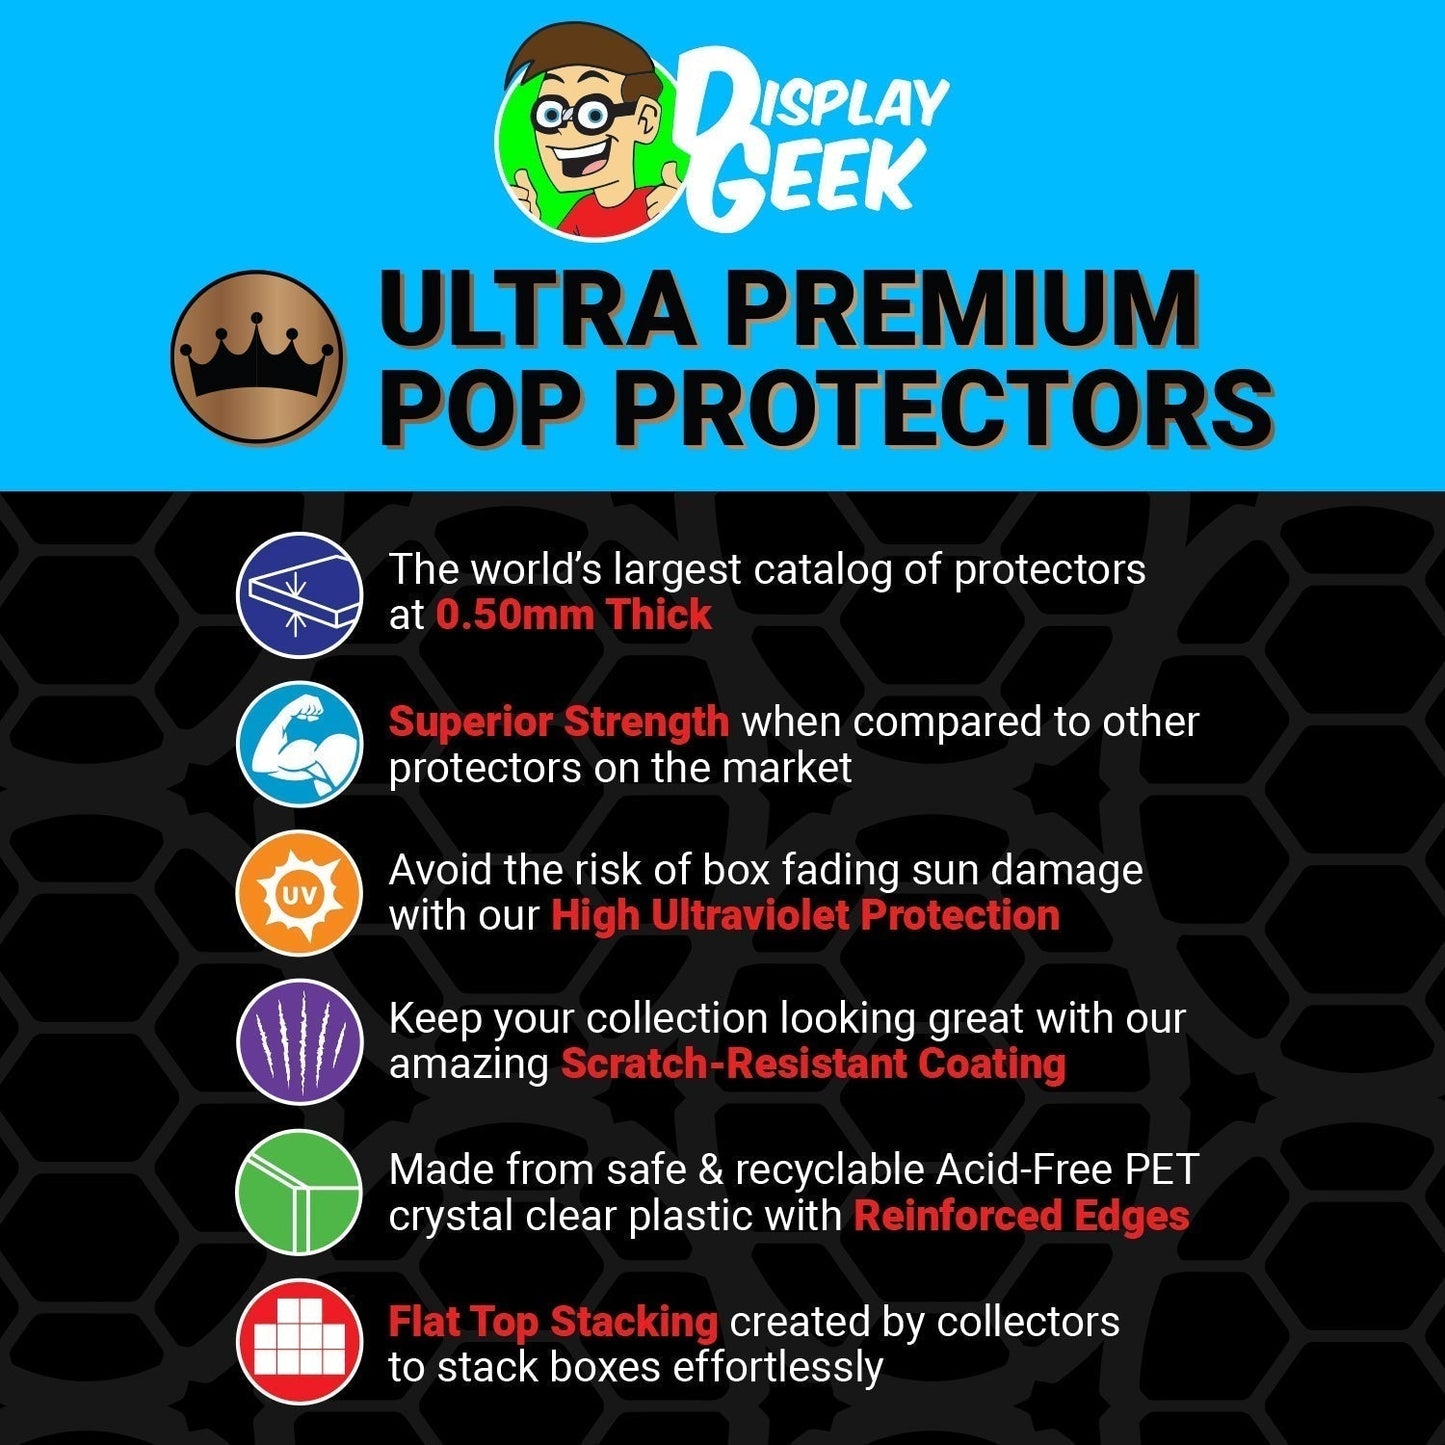 Pop Protector for 6 inch Fezzik NYCC #1023 Super Funko Pop - PPG Pop Protector Guide Search Created by Display Geek